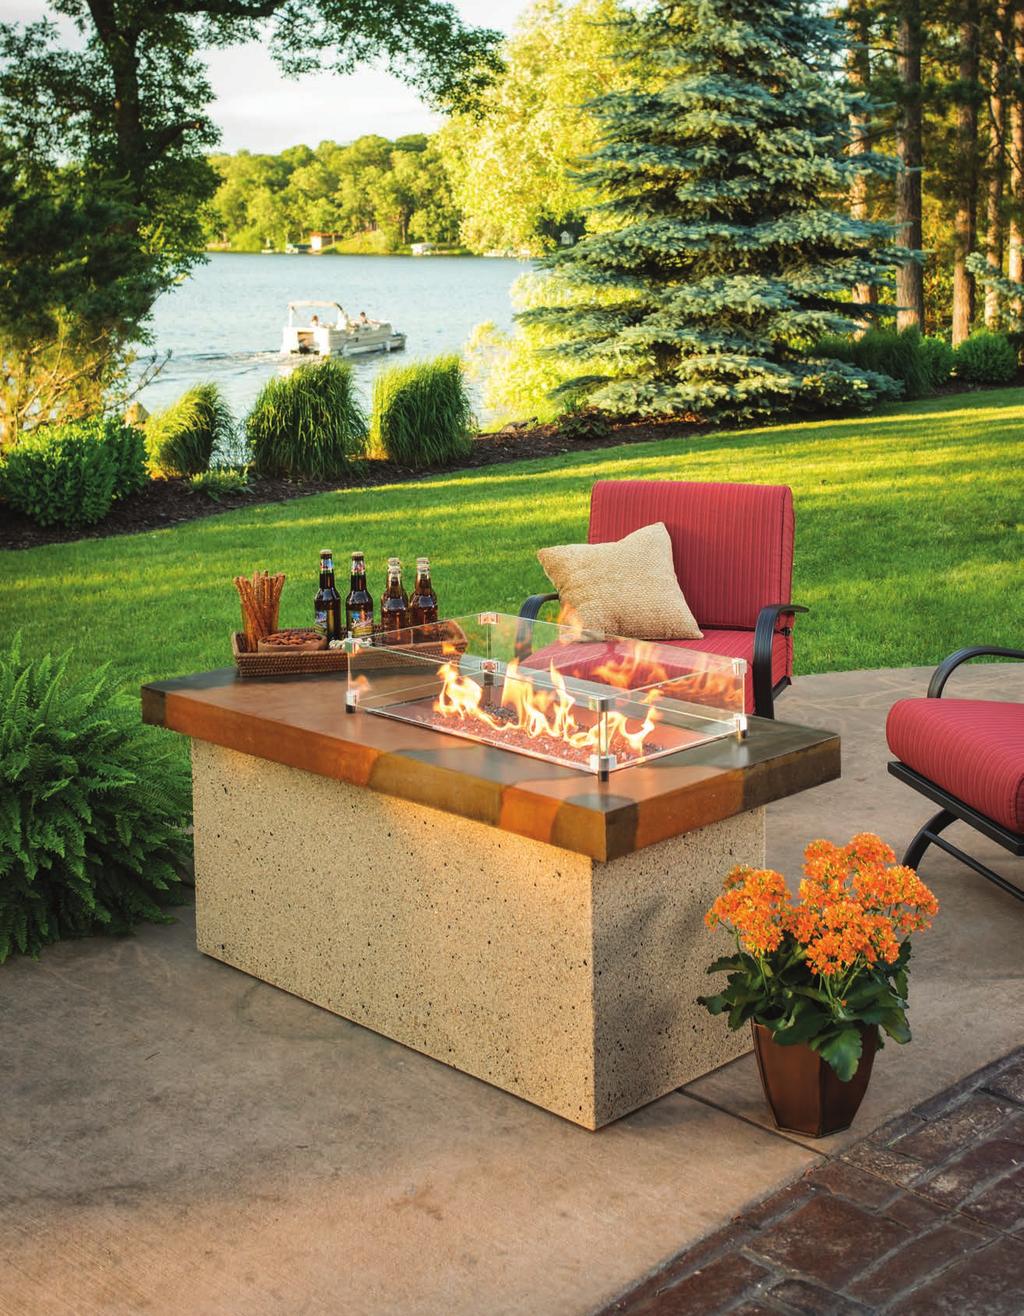 FIRE PITS A warm, cozy fire for every space Light up the night and add warmth to your outdoor space with a beautiful fire pit, fire pit table, or table top model.